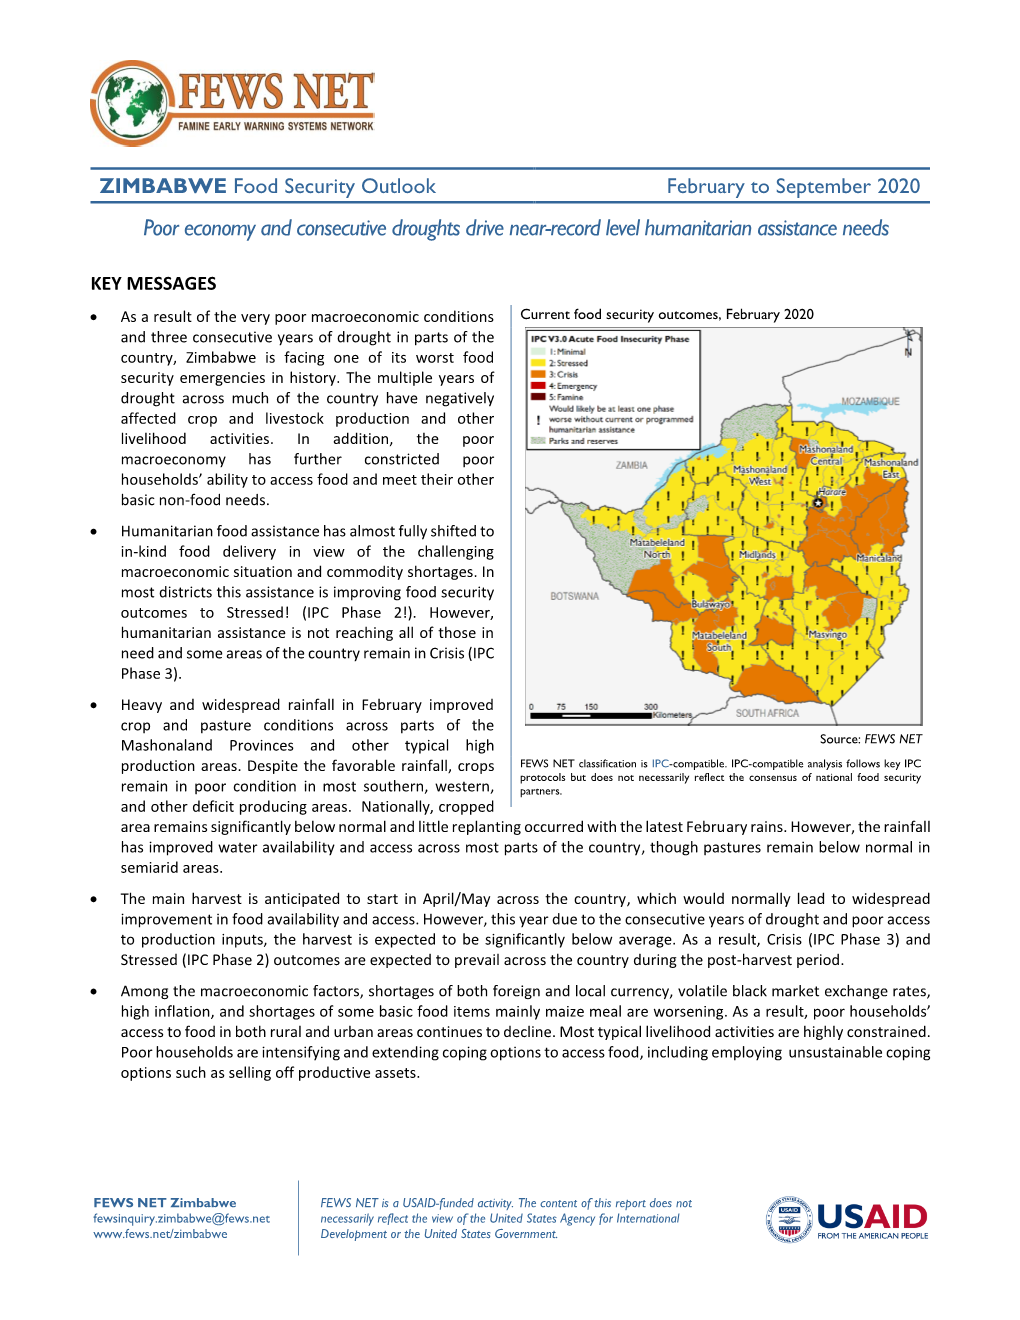 ZIMBABWE Food Security Outlook February to September 2020 Poor Economy and Consecutive Droughts Drive Near-Record Level Humanitarian Assistance Needs